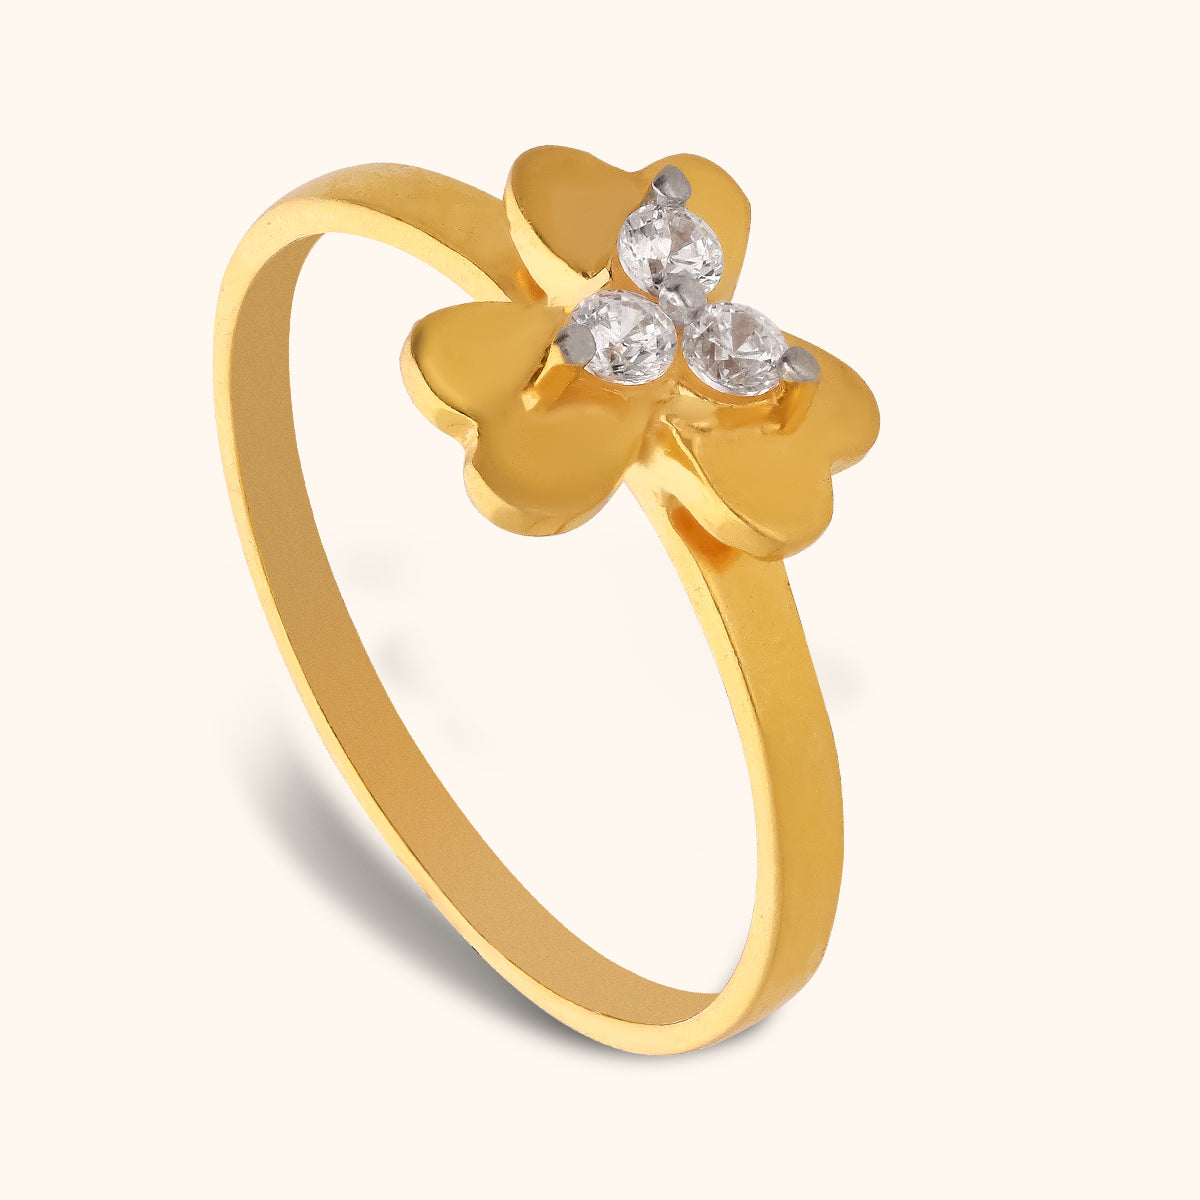 Buy quality 22KT Gold Plain Fancy Ladies Ring – Welcome to Rani Alankar